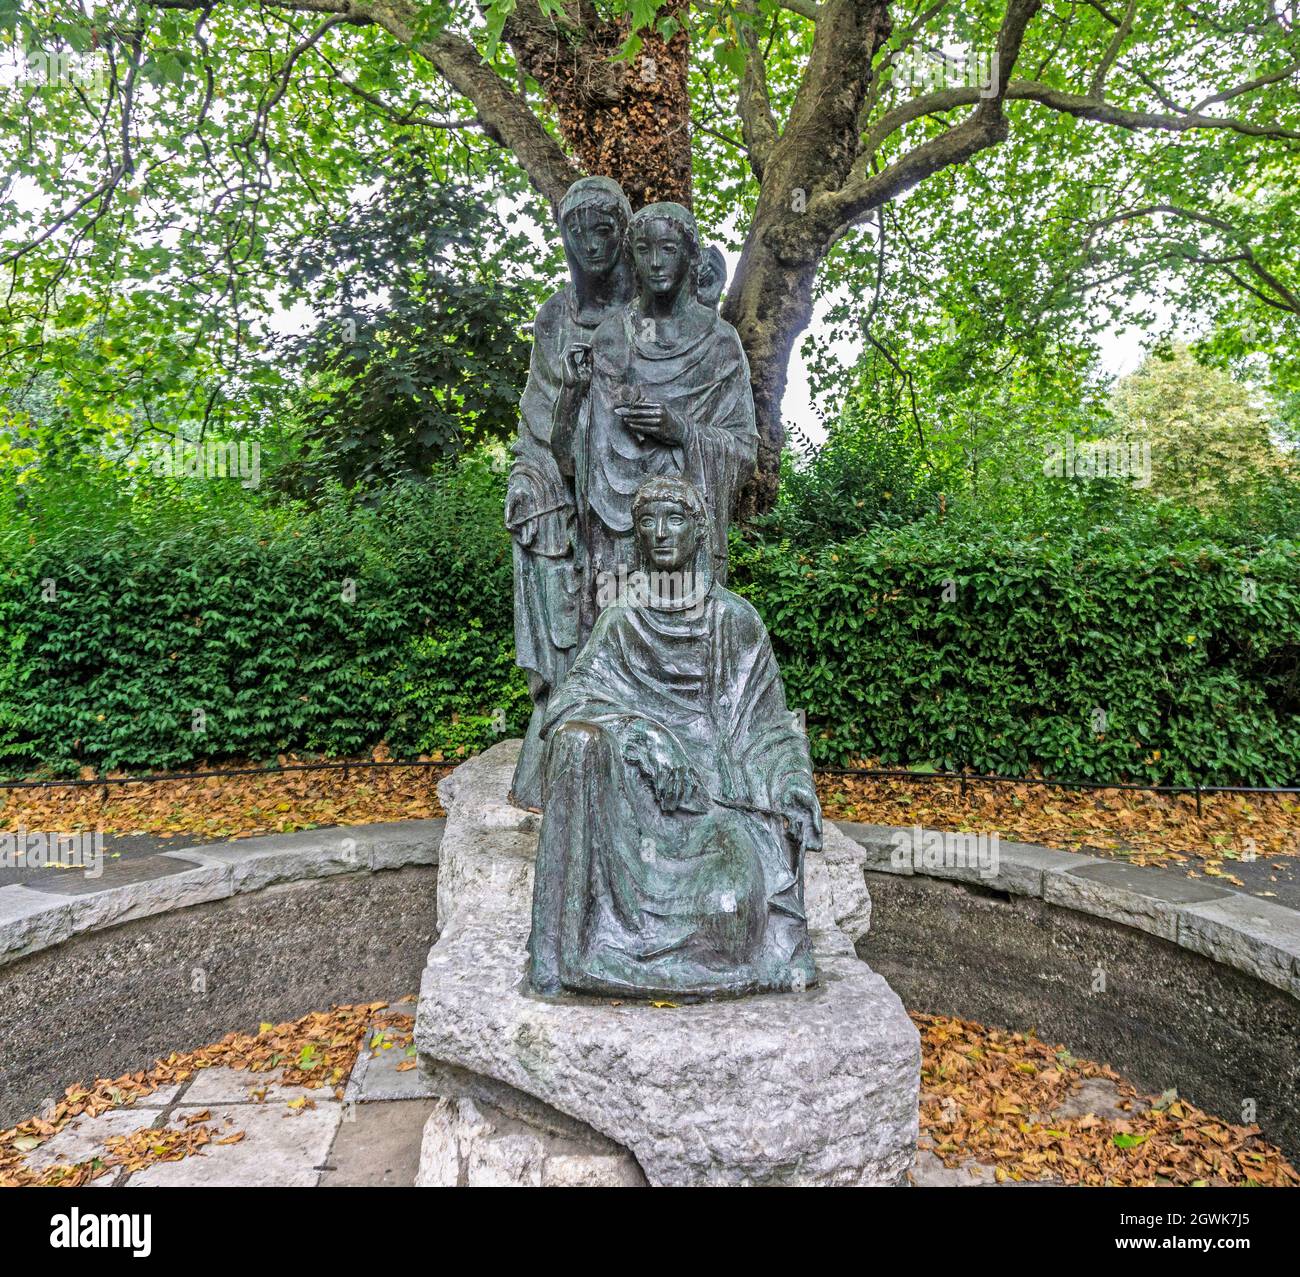 The Three Fates, a bronze sculpture by Josef Wackerle, in St Stephens Green, Dublin presented by Roman Herzog President, Federal Republic of Germany. Stock Photo